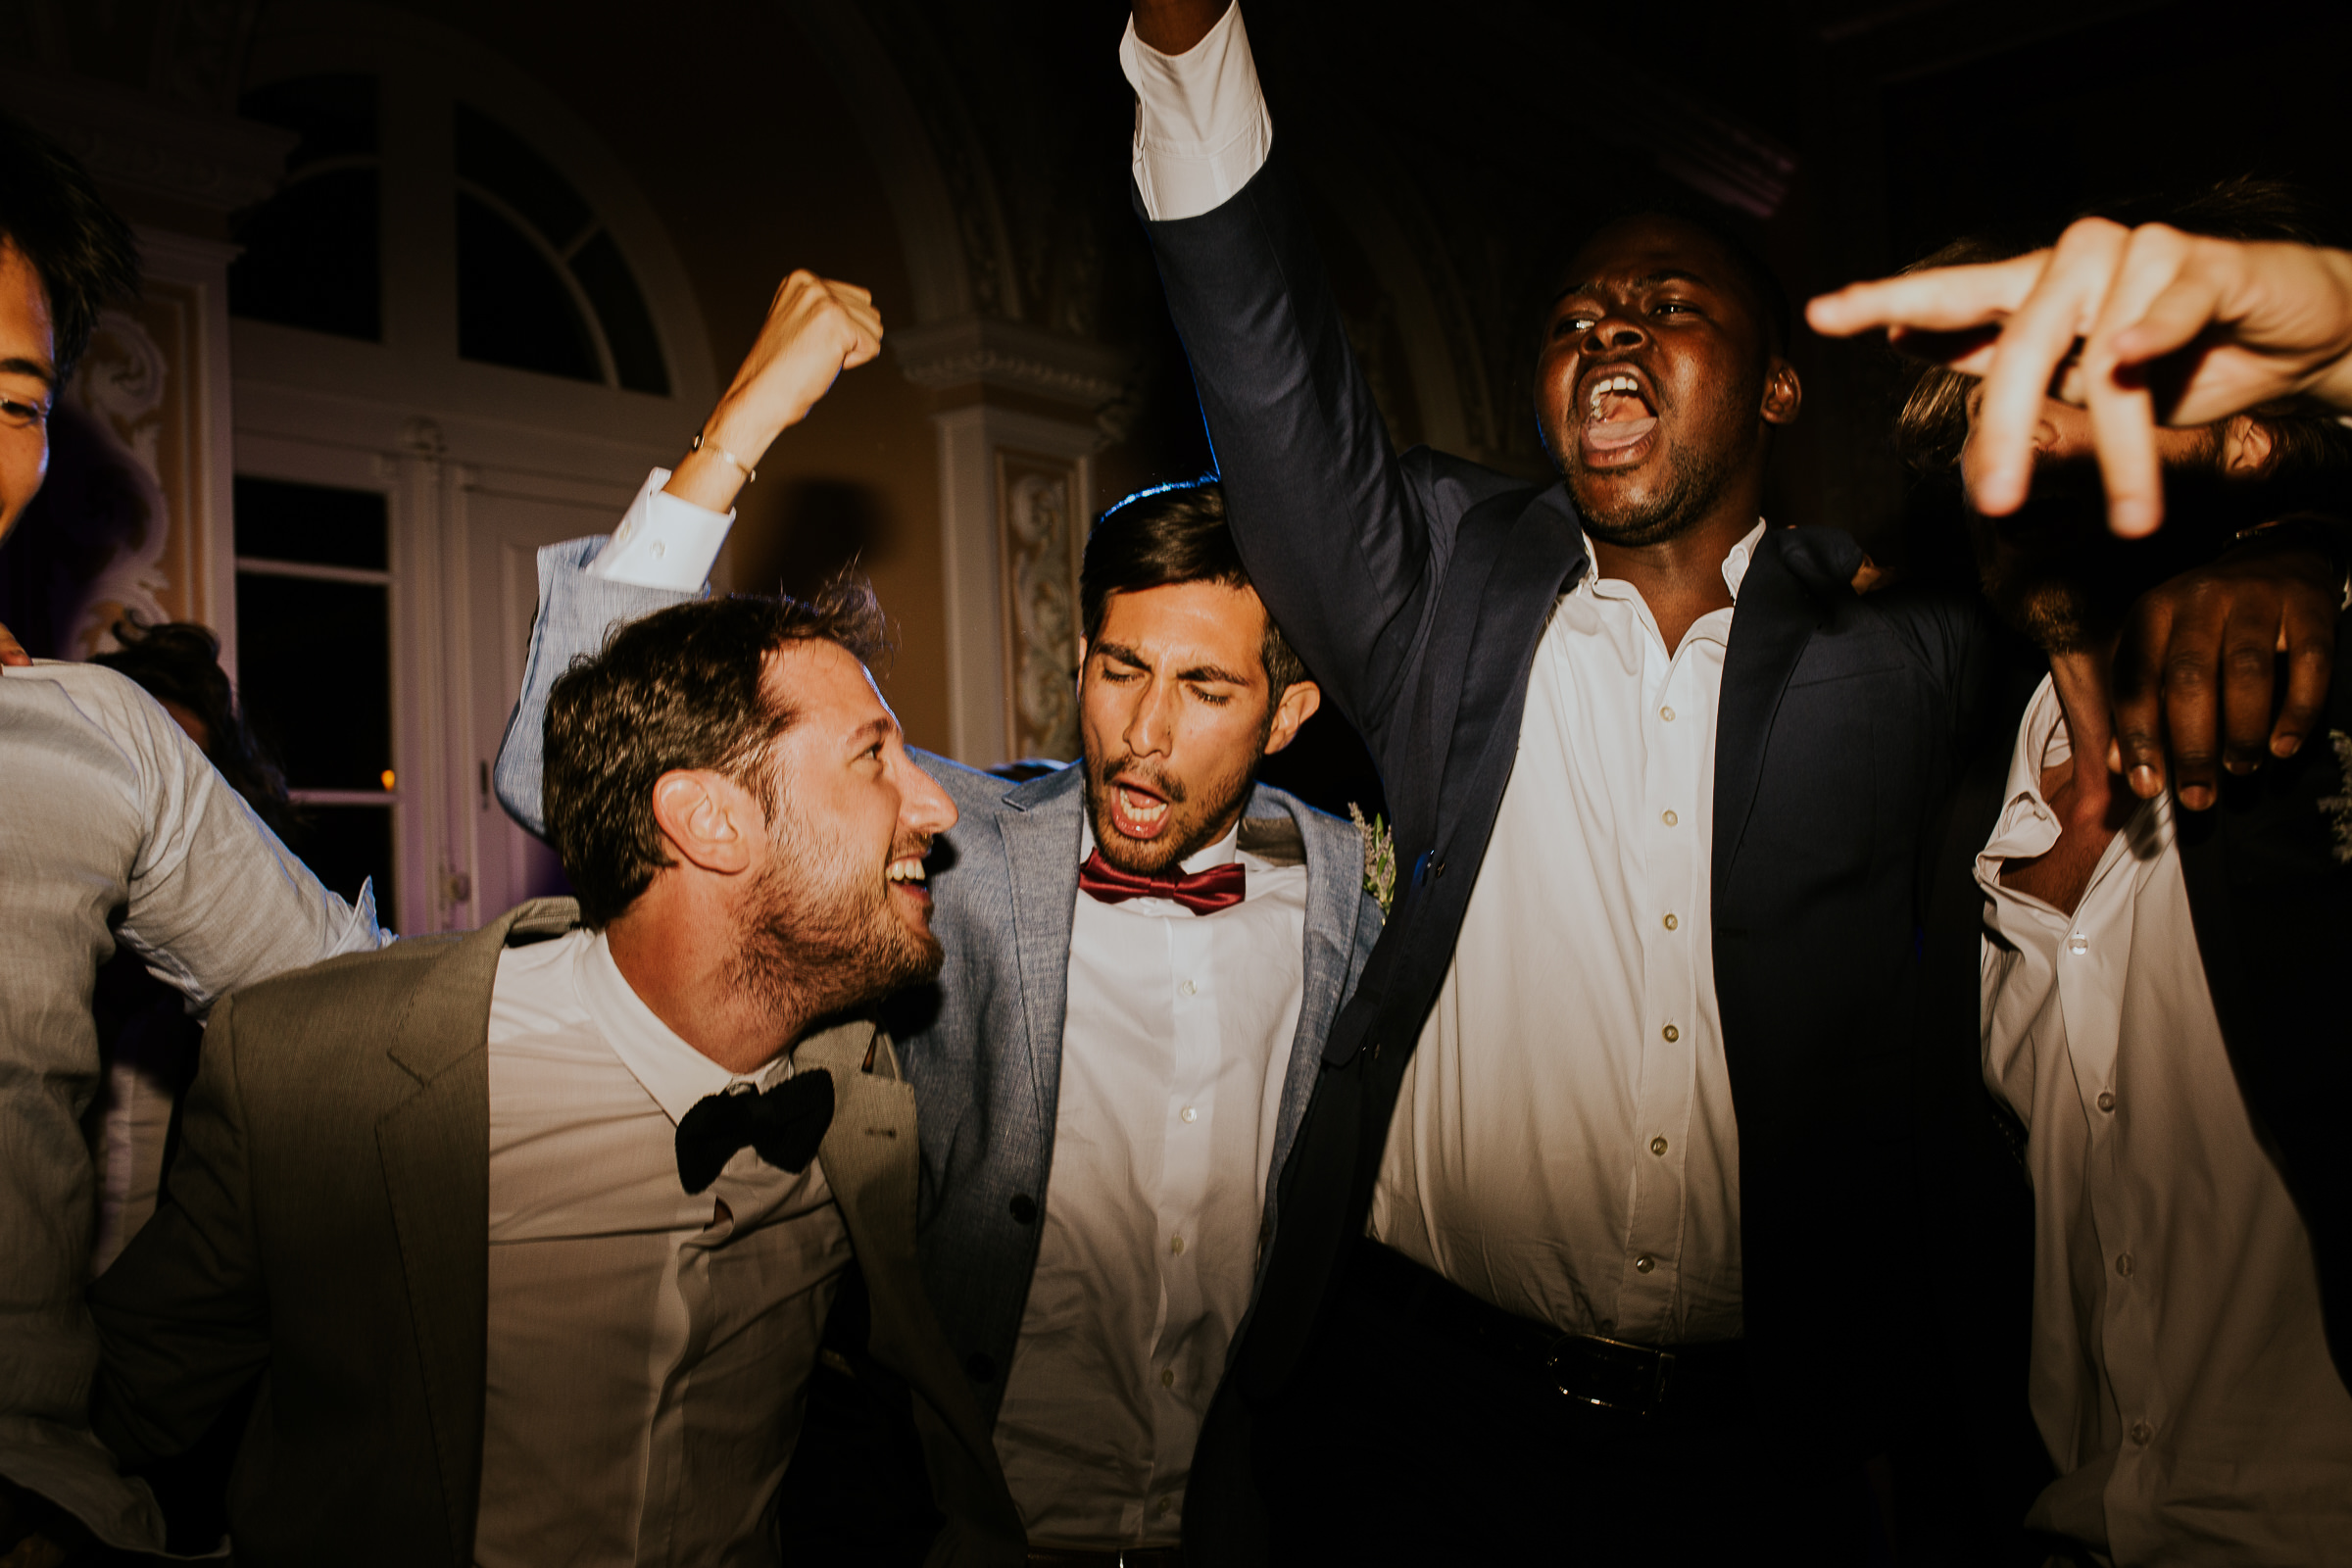 Guys partying hard in a wedding